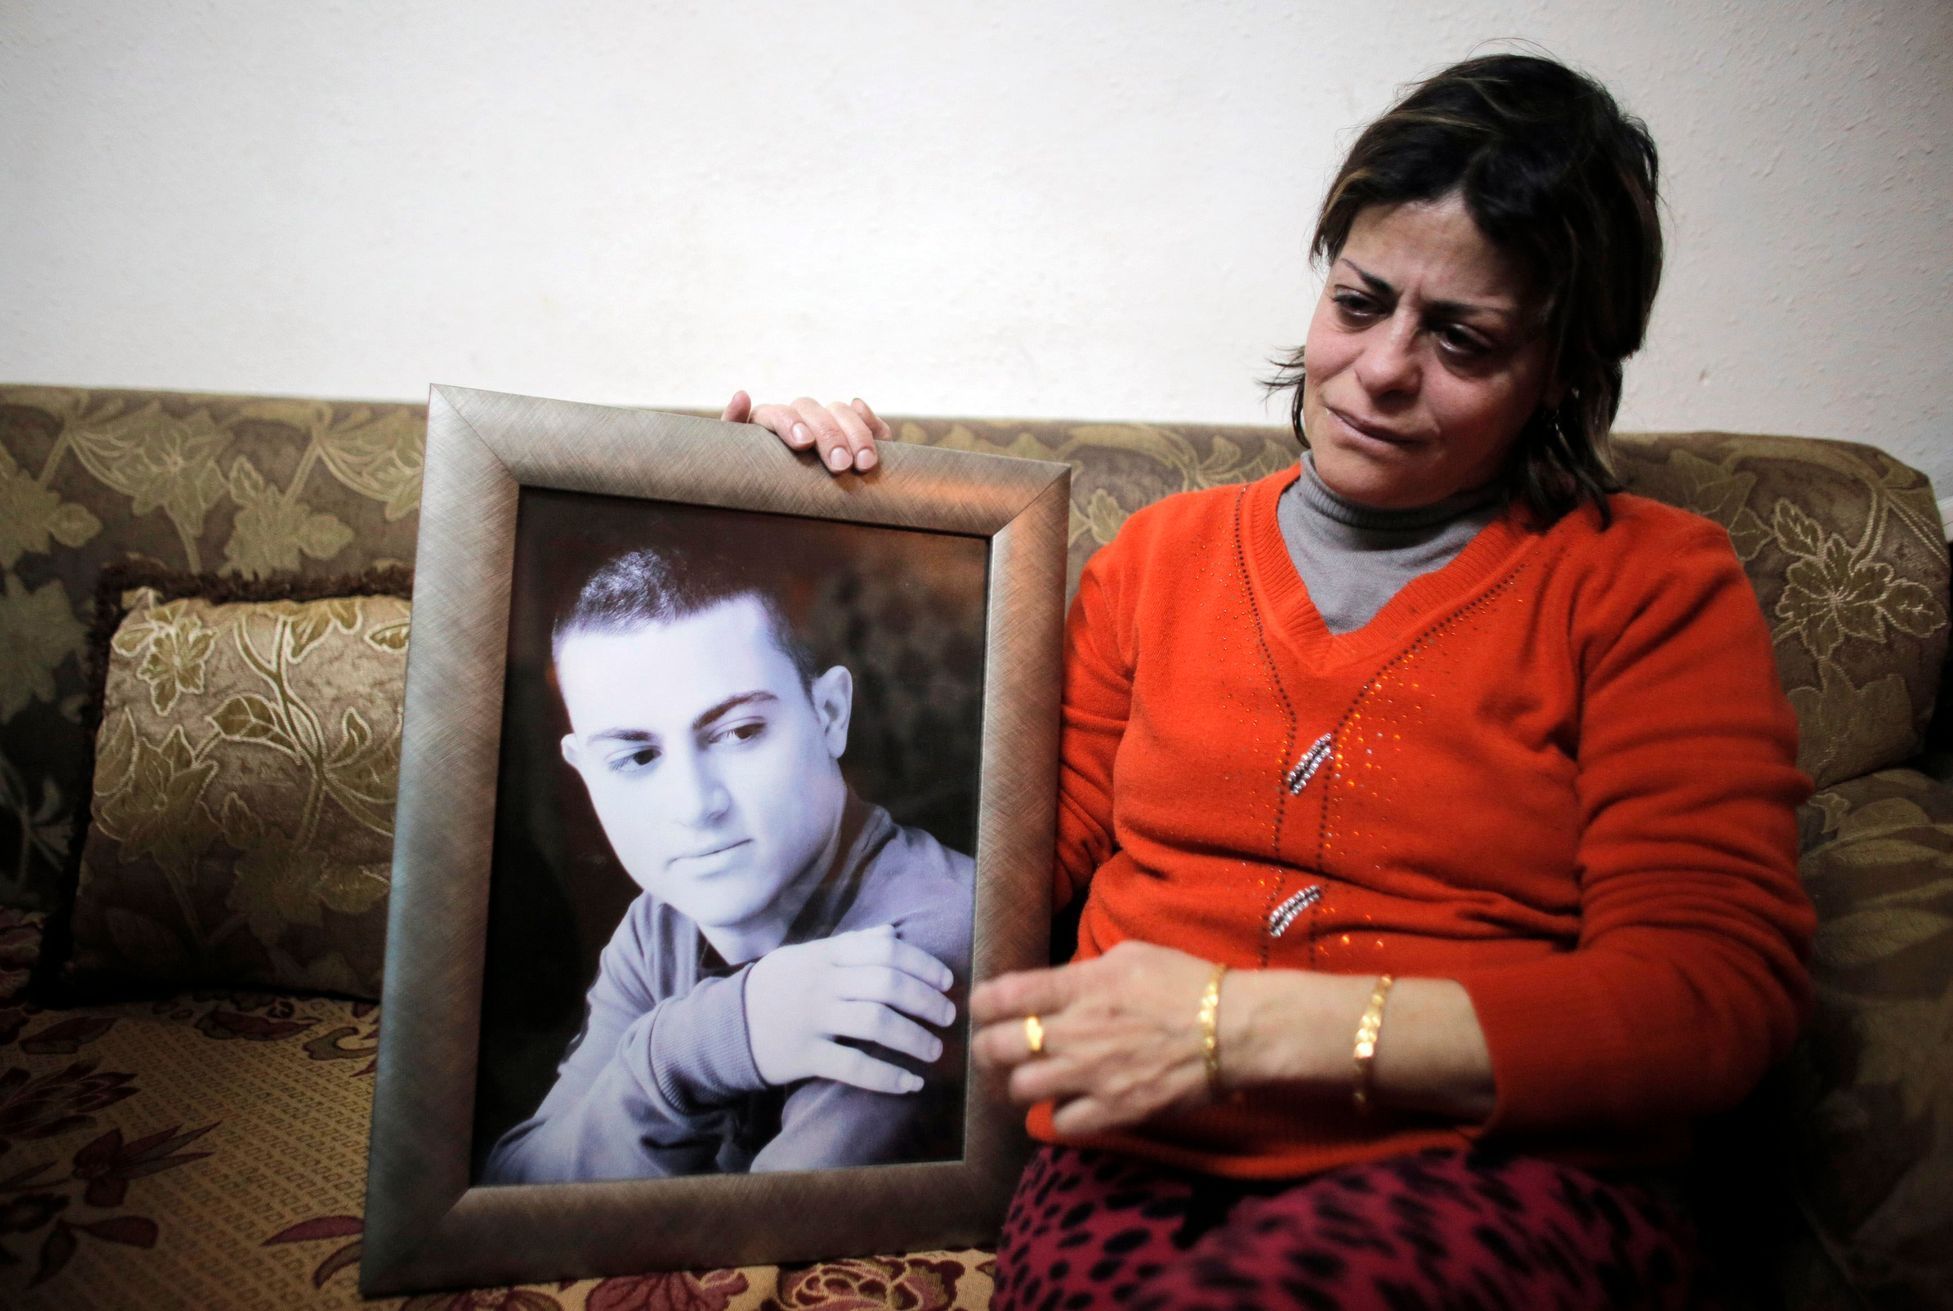 File photo of the mother of Muhammad Musallam, an Israeli Arab held by Islamic State in Syria as an alleged spy, weeping as she holds his photograph in her East Jerusalem home